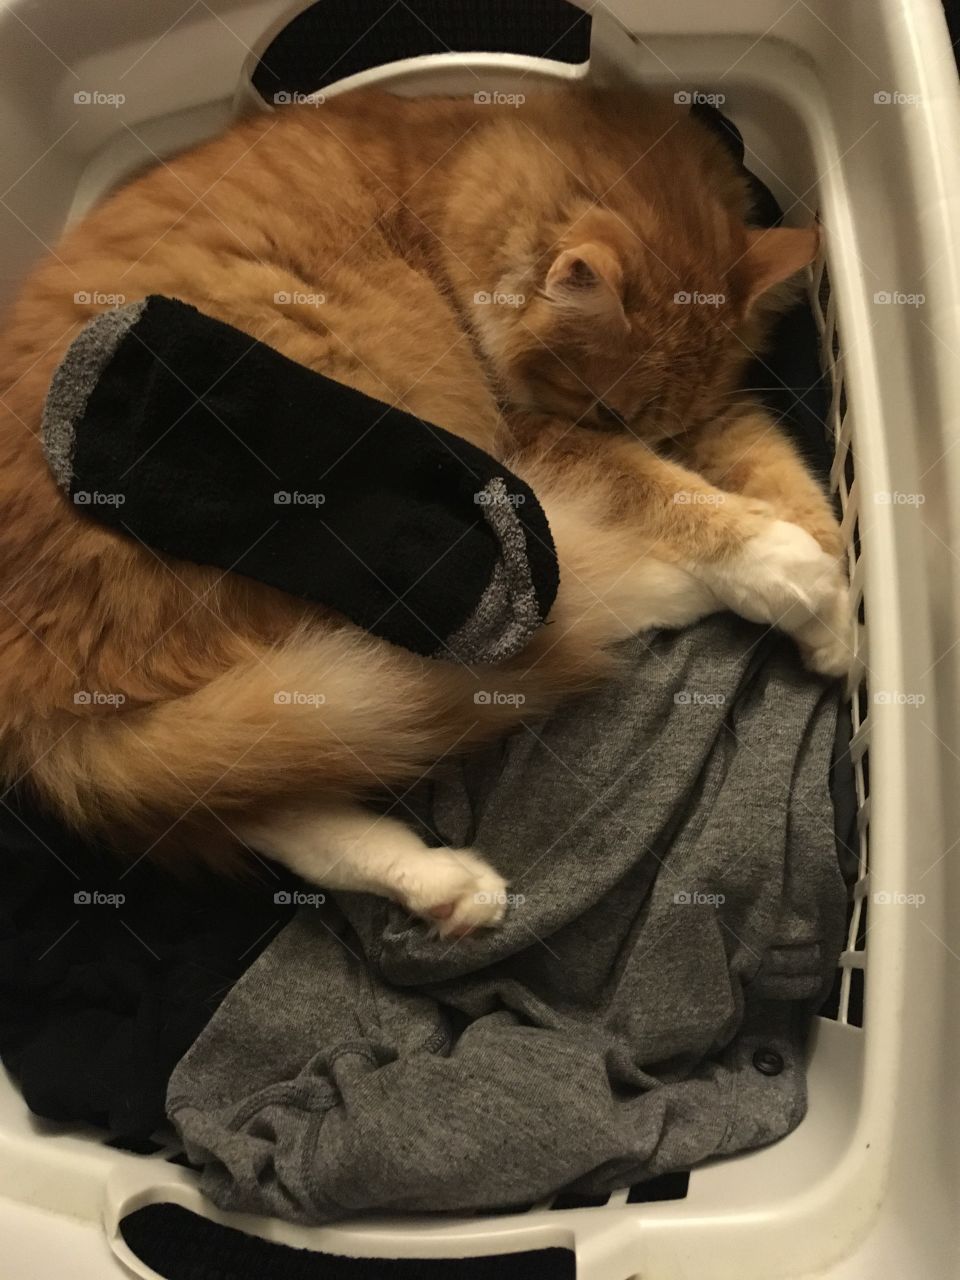 Who needs fabric softener when you have a kitty cuddling your clothes 